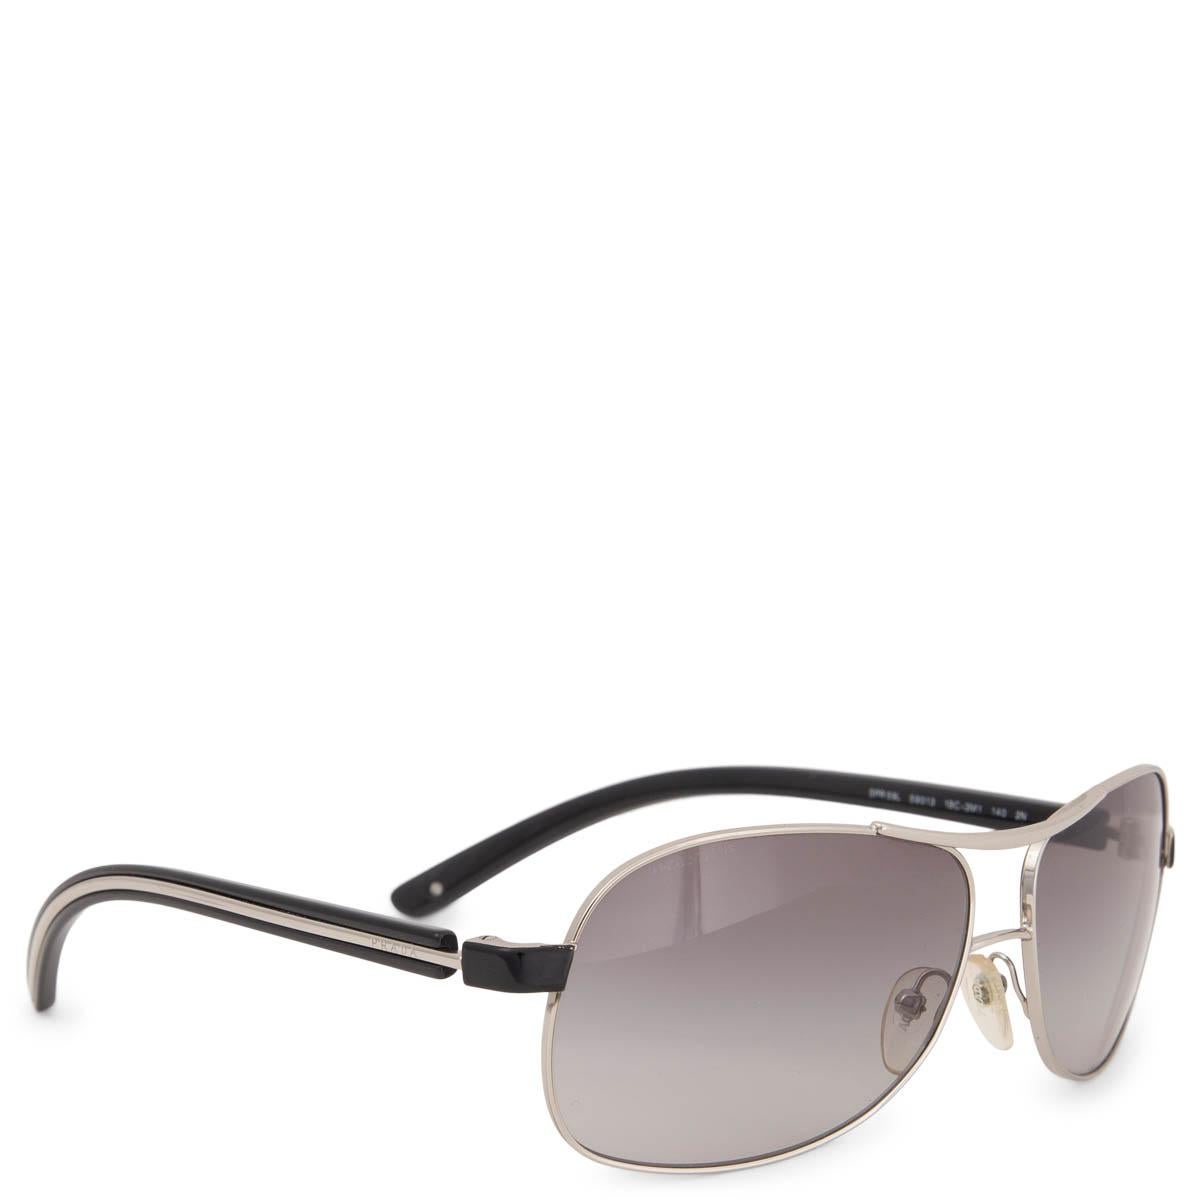 100% authentic Prada SPR 59L sunglasses made of a silver-tone metal frame with light grey gradient lenses and black acetate temples. Have been worn and are in excellent condition. Come with case and box. 

Measurements
Model	SPR 59L 
Width	14.5cm